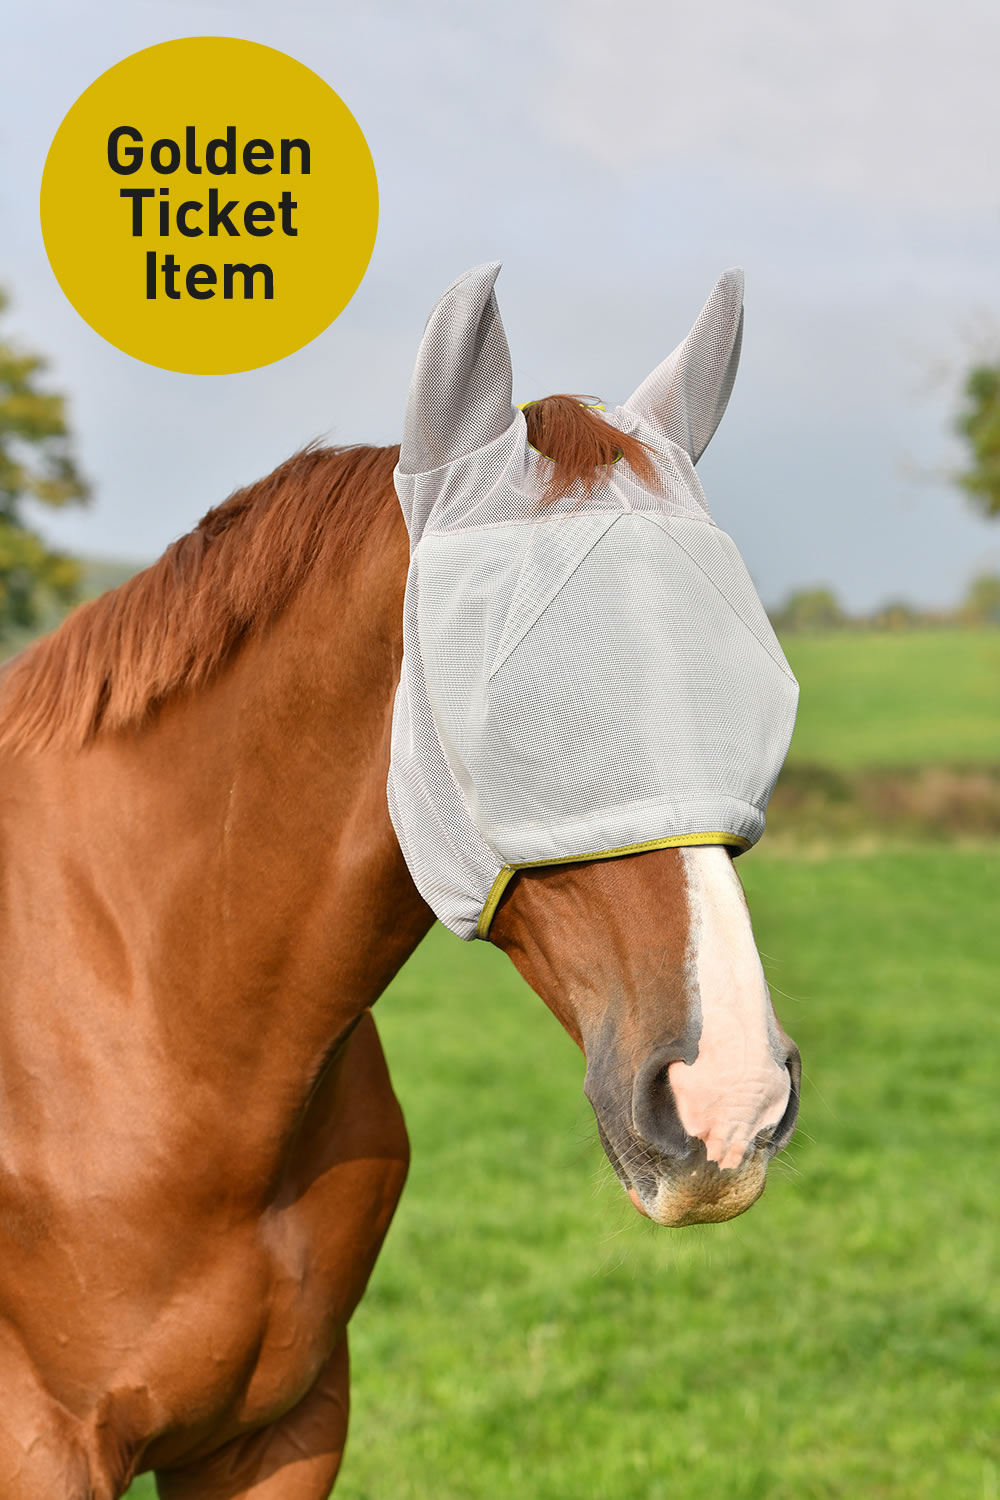 EQUILIBRIUM FIELD RELIEF MIDI FLY MASK & EARS GREY/YELLOW SMALL GREY/YELLOW SMALL